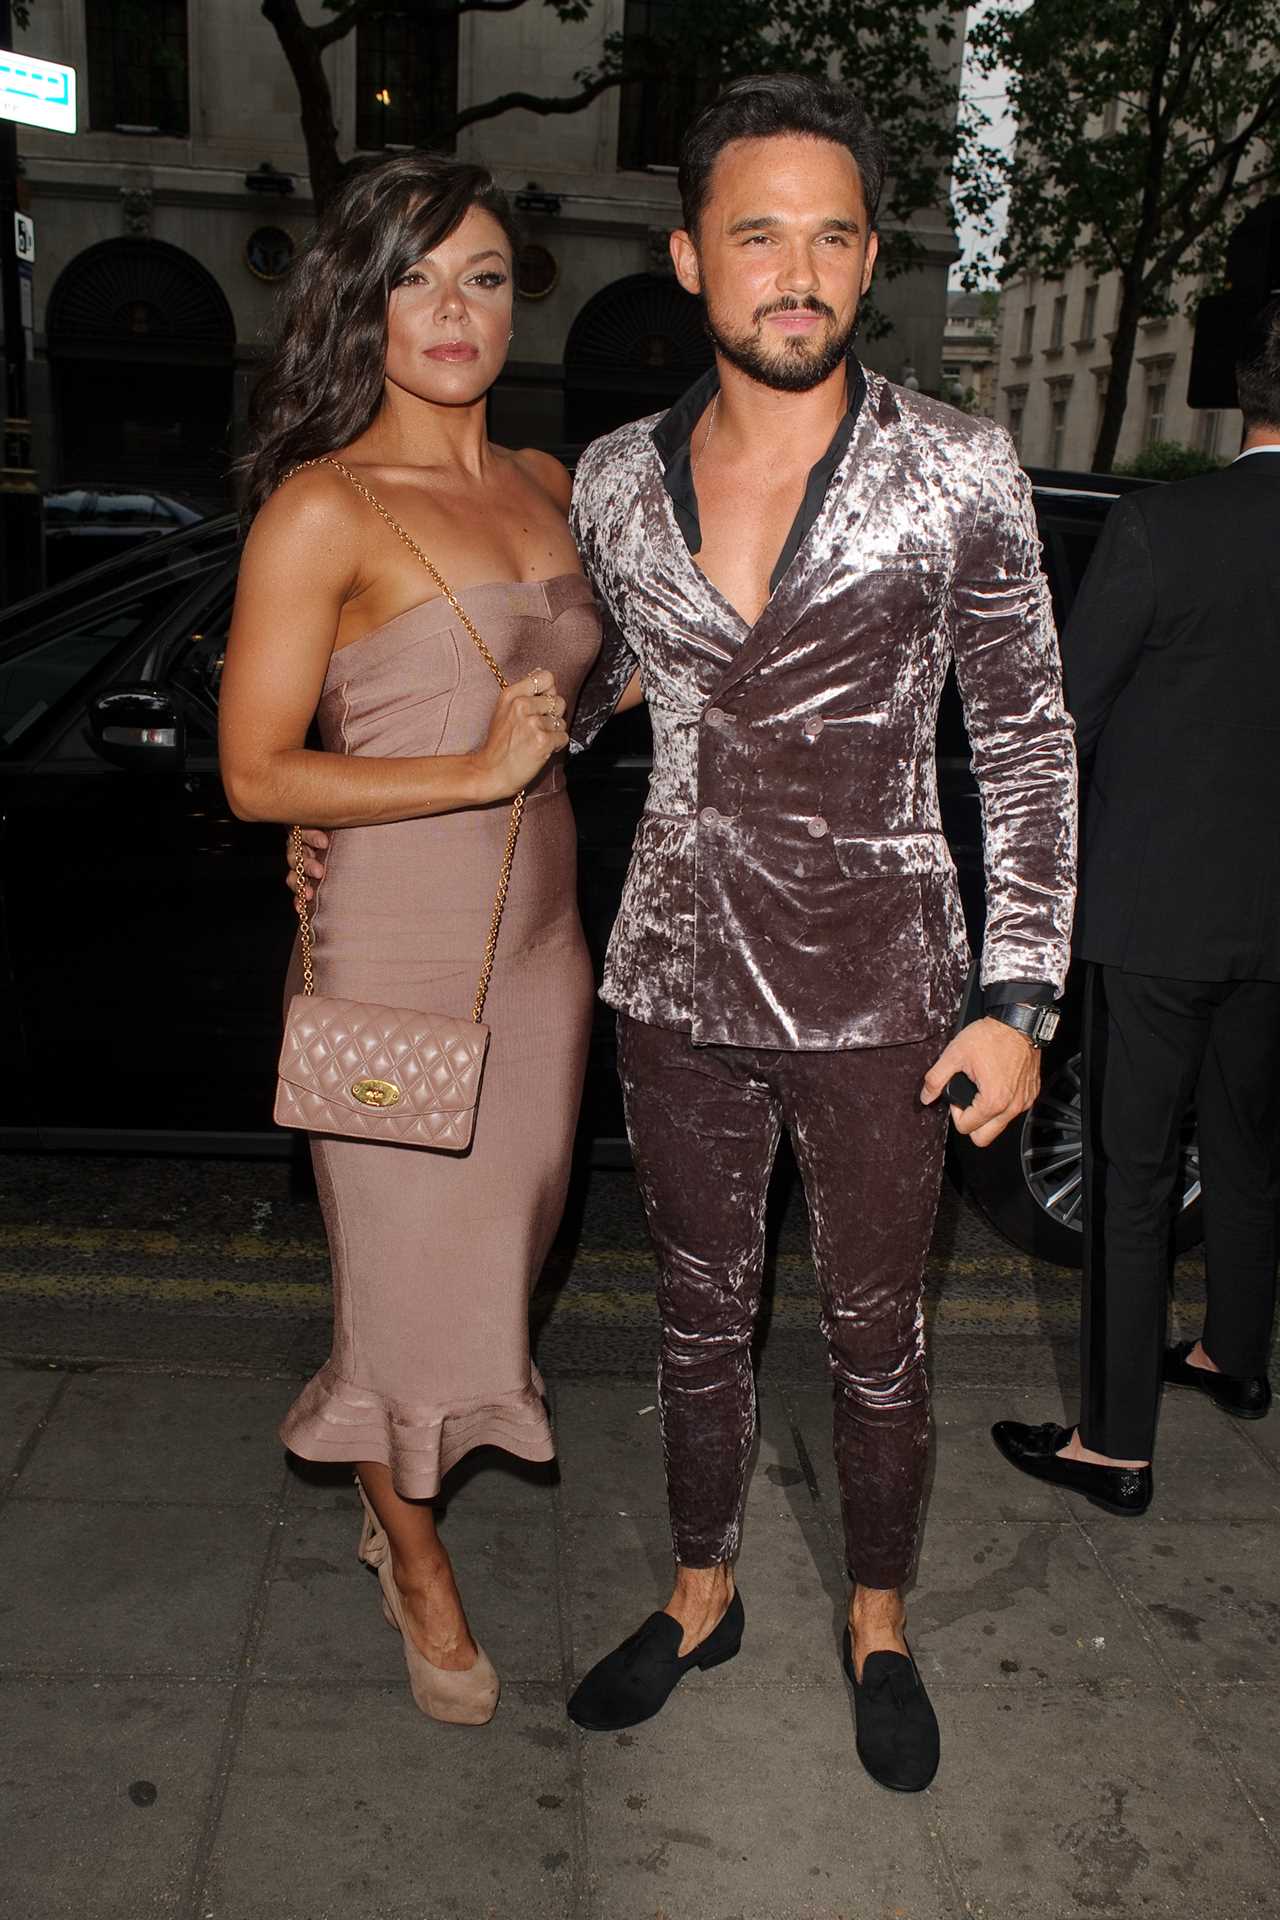 Dancing On Ice star Faye Brookes goes official with new boyfriend – one day after ex Gareth Gates split with girlfriend